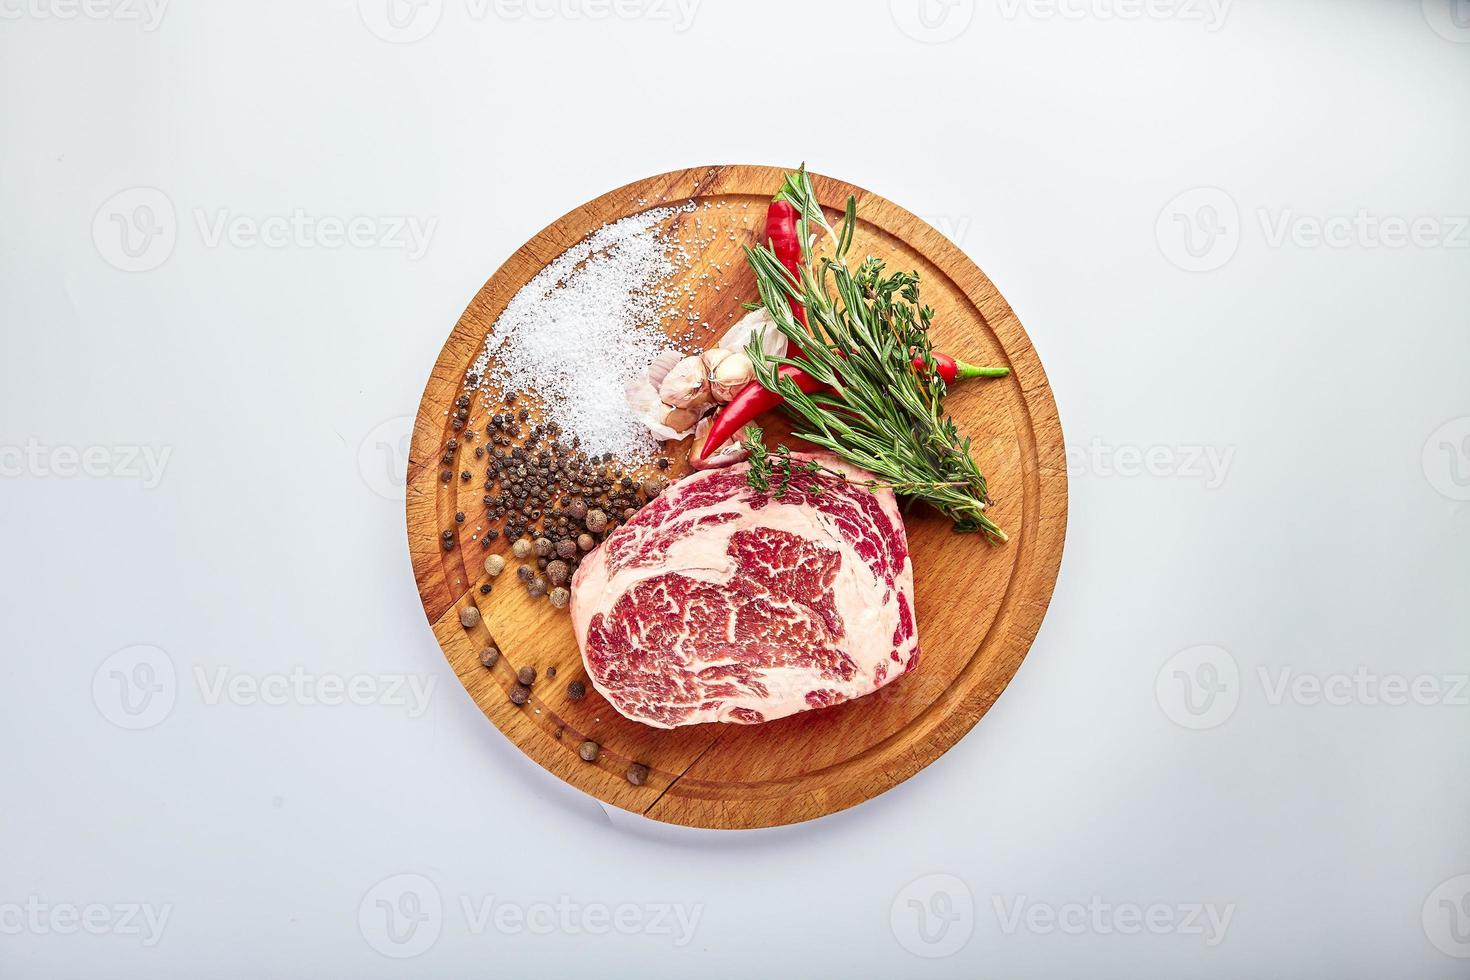 Ribeye steak on the butcher's Board with rosemary, pepper and salt on a wooden table, prepared for cooking. photo